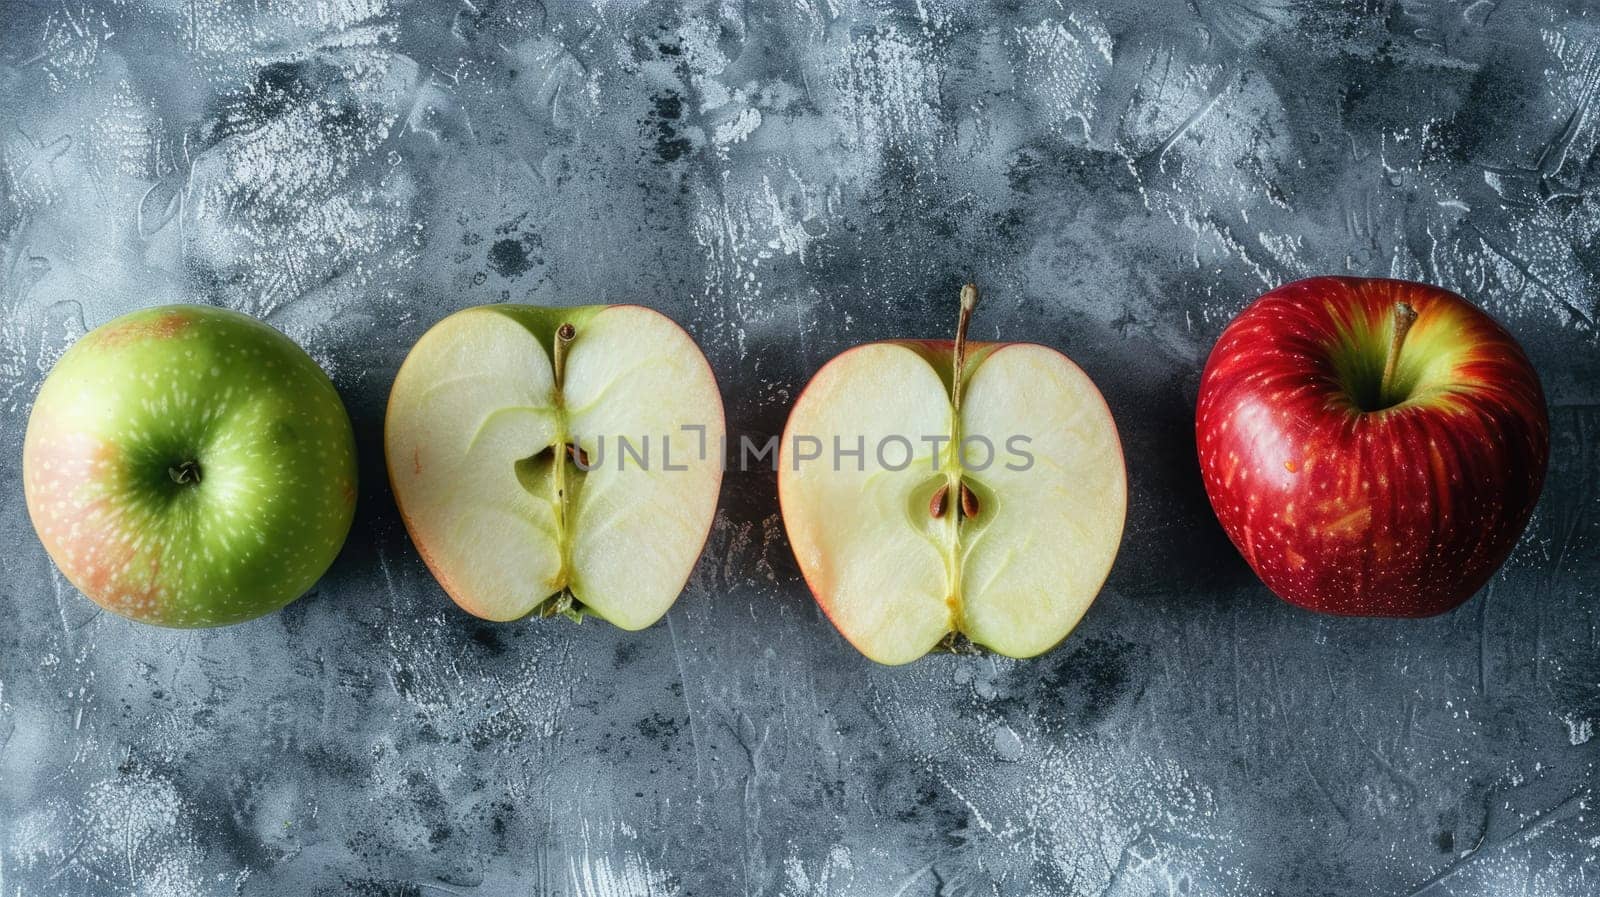 Sliced apple and whole apples on a textured gray background by natali_brill